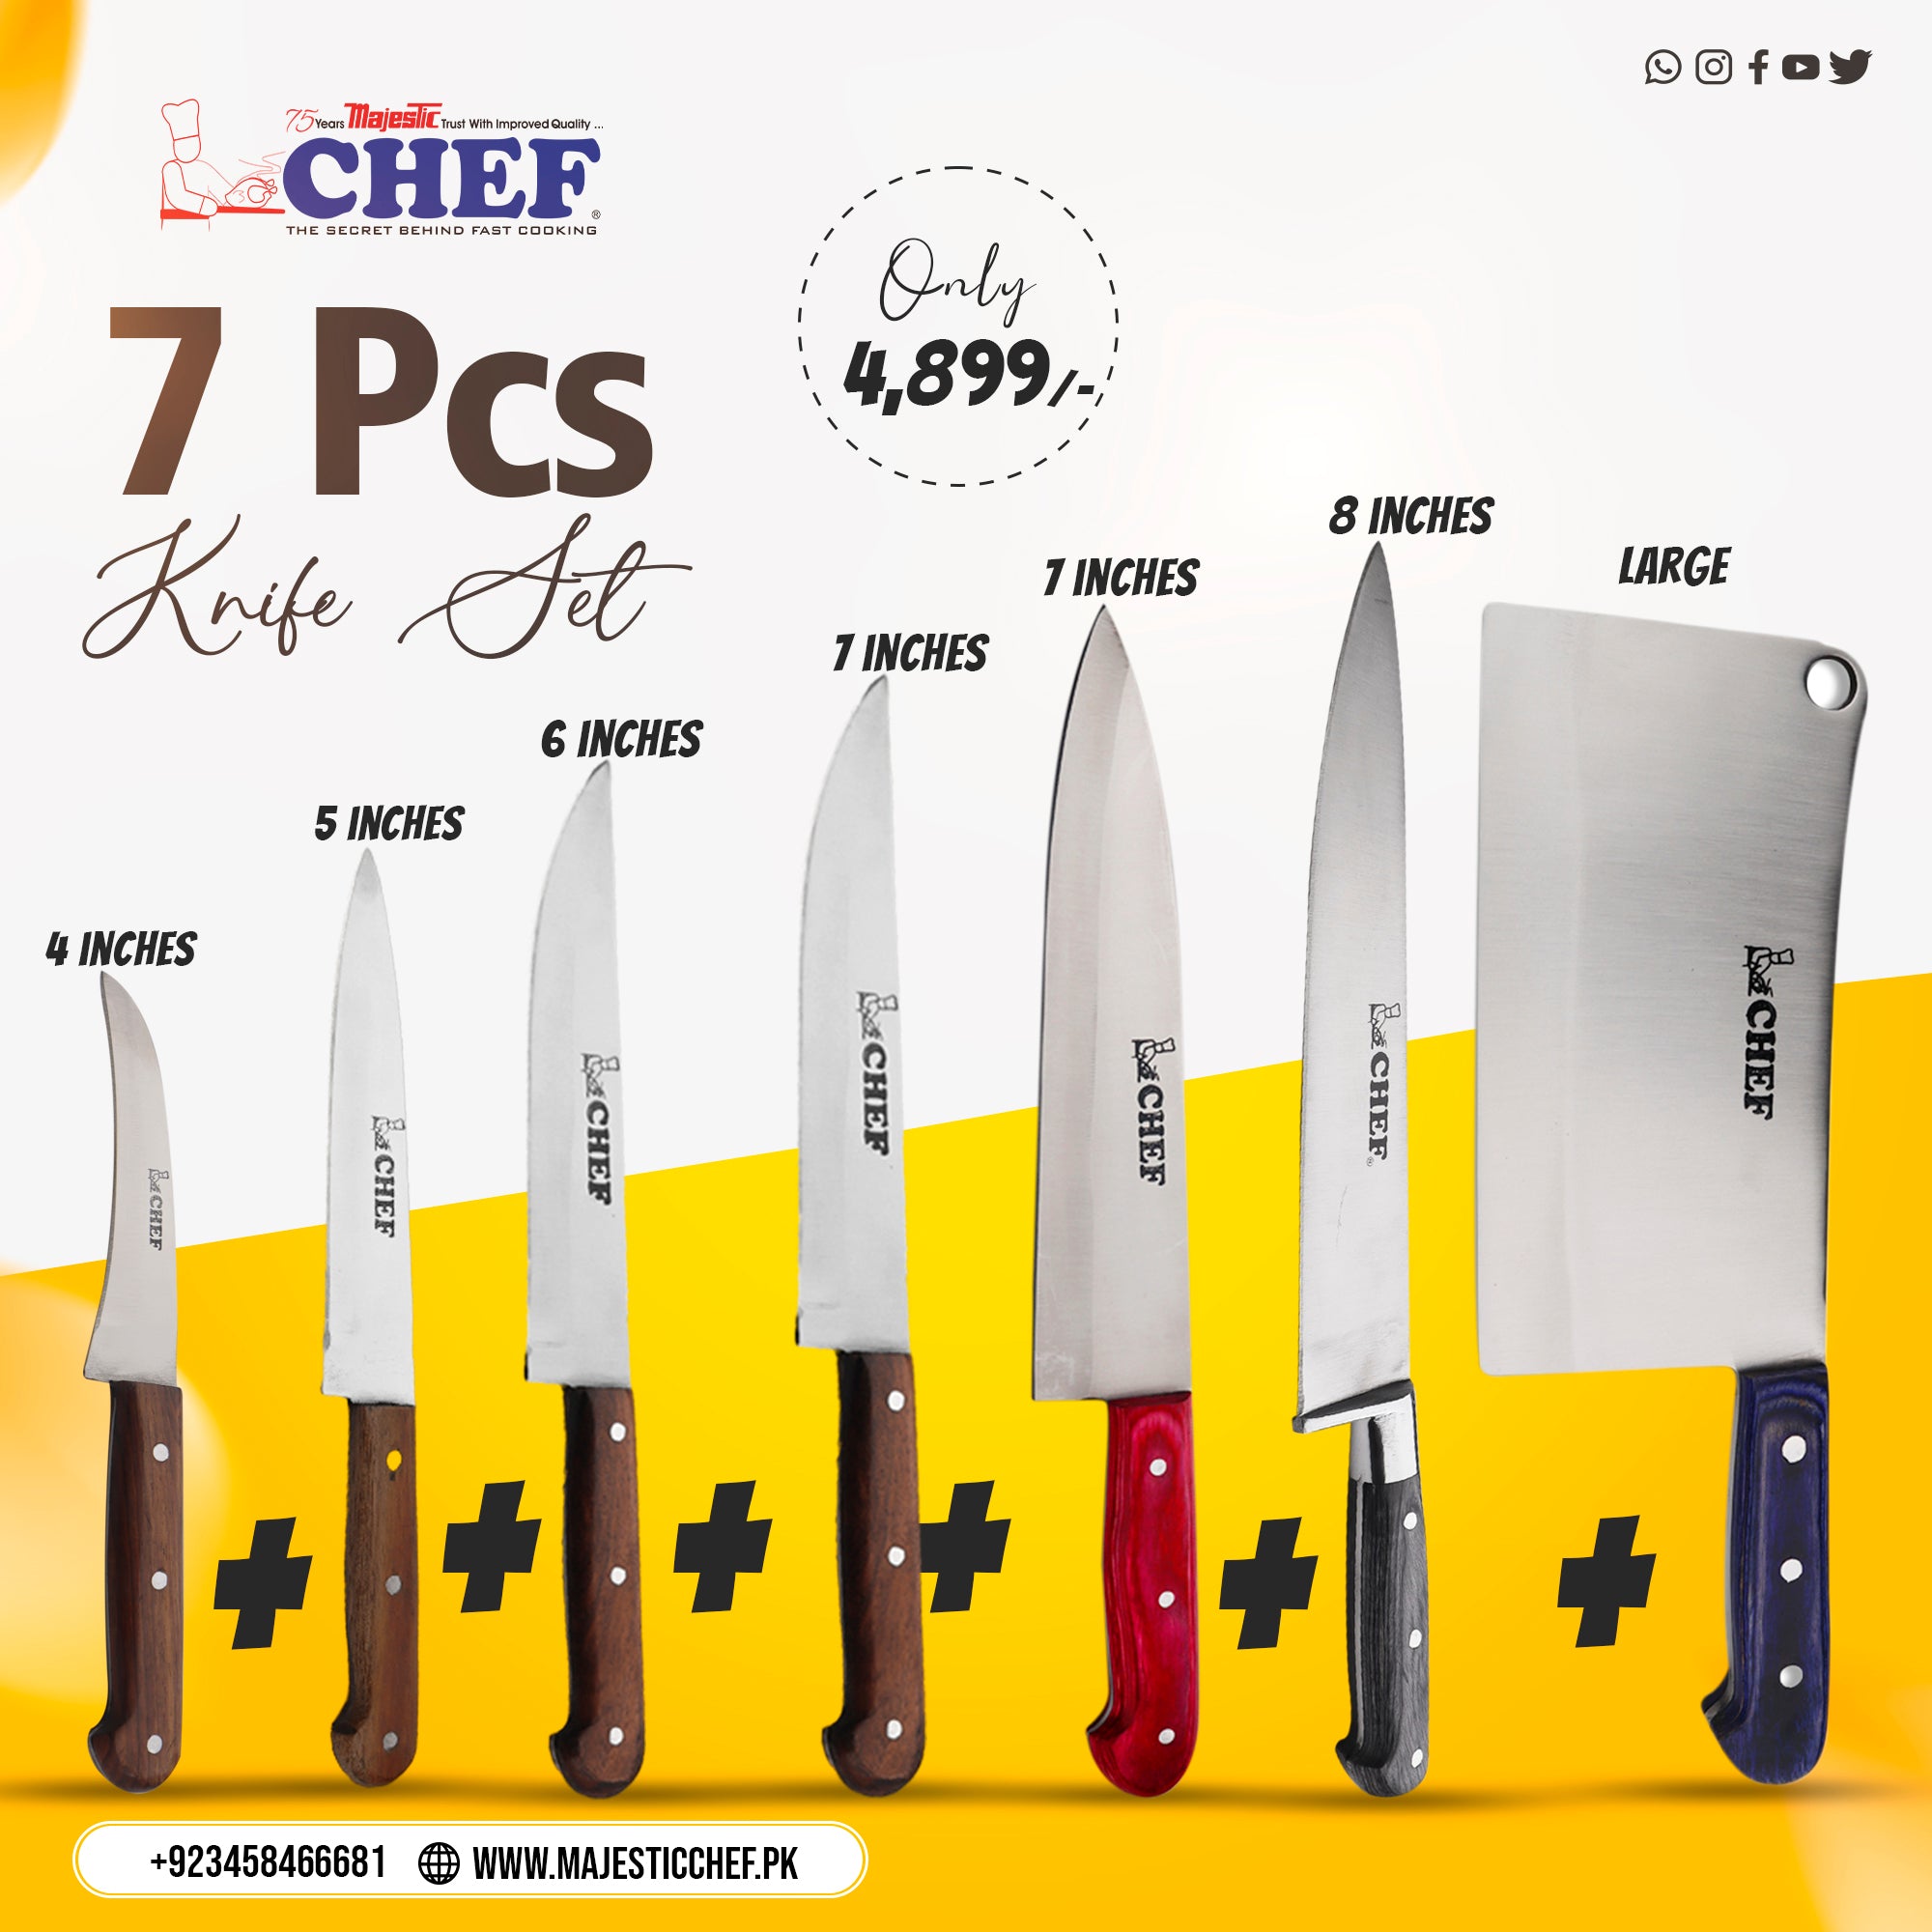 7 Pcs Stainless Steel Chef Knife Set-Combo Deals ( 4,5,6,7 inch & Pro knife 7 inch + Brazil Knife 8 inch & Large Cleaver) WH